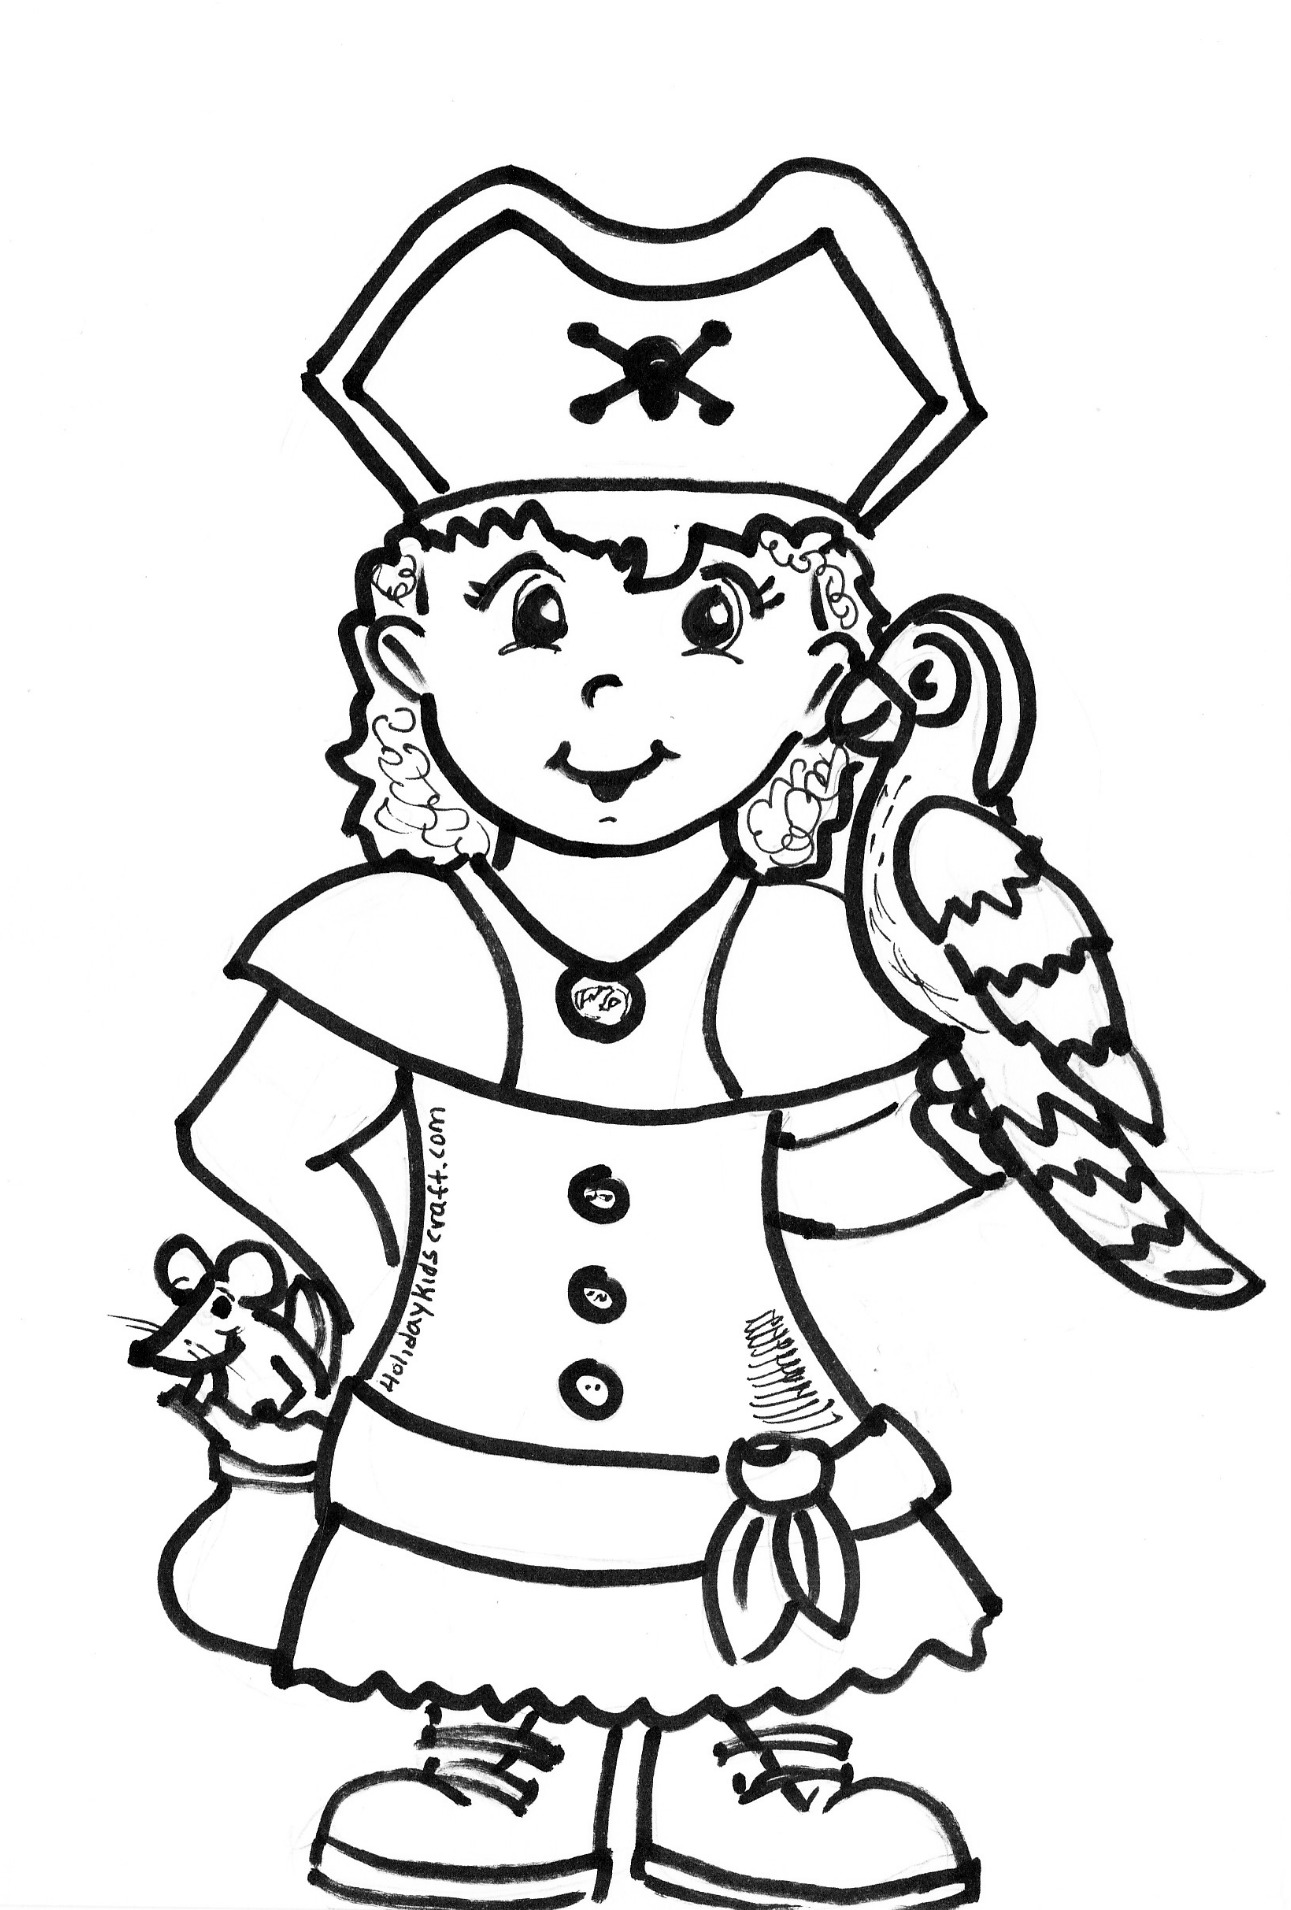 incredible Pirate Coloring Pages : Gallery Photos ...